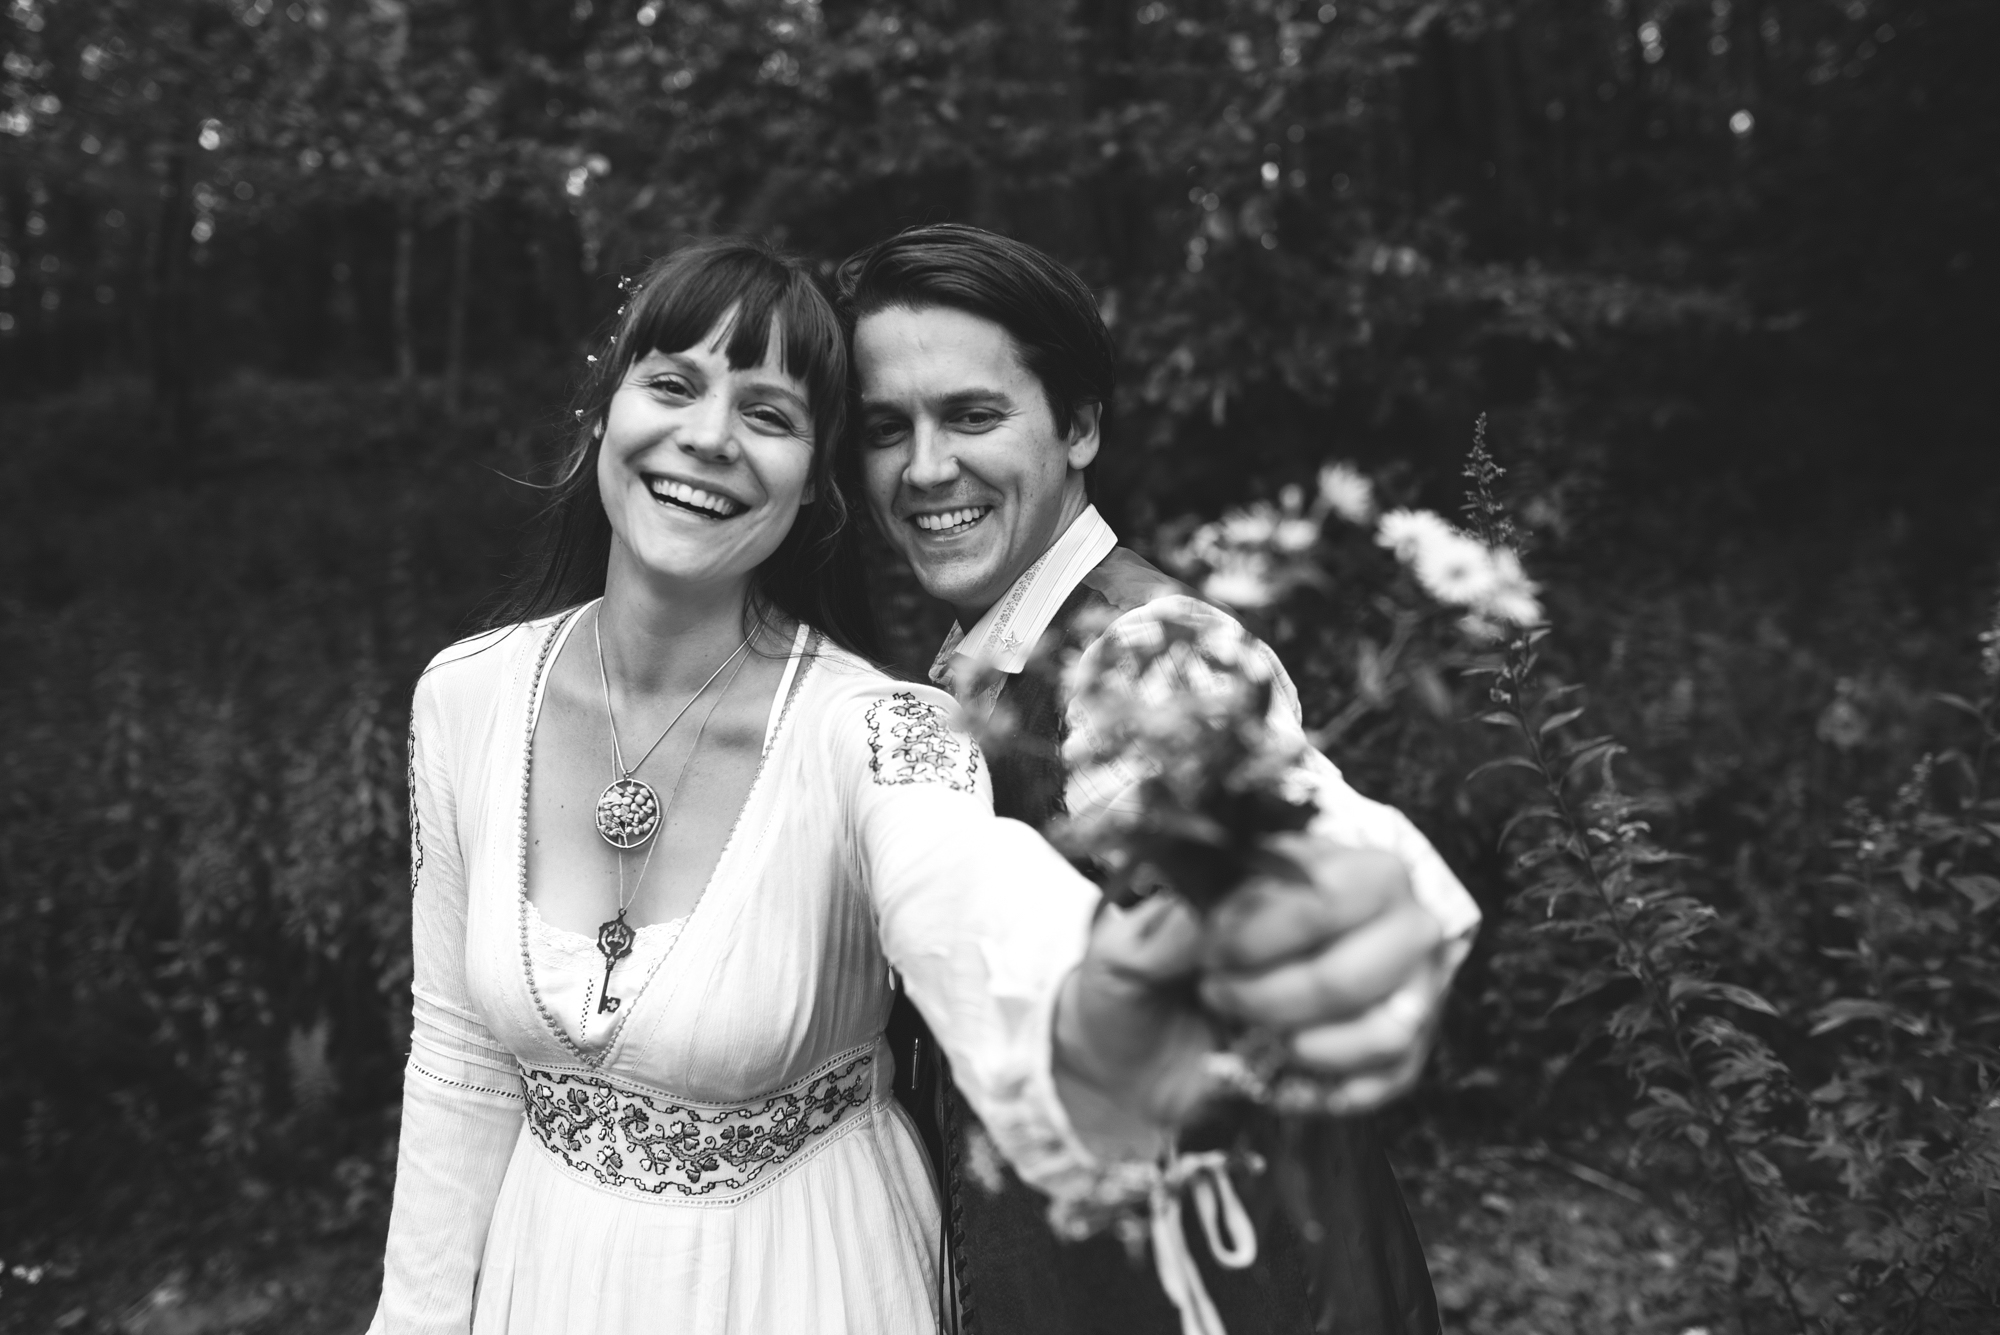  Mountain Wedding, Outdoors, Rustic, West Virginia, Maryland Wedding Photographer, DIY, Casual, black and white photo, bride and groom smiling and holding wildflowers 